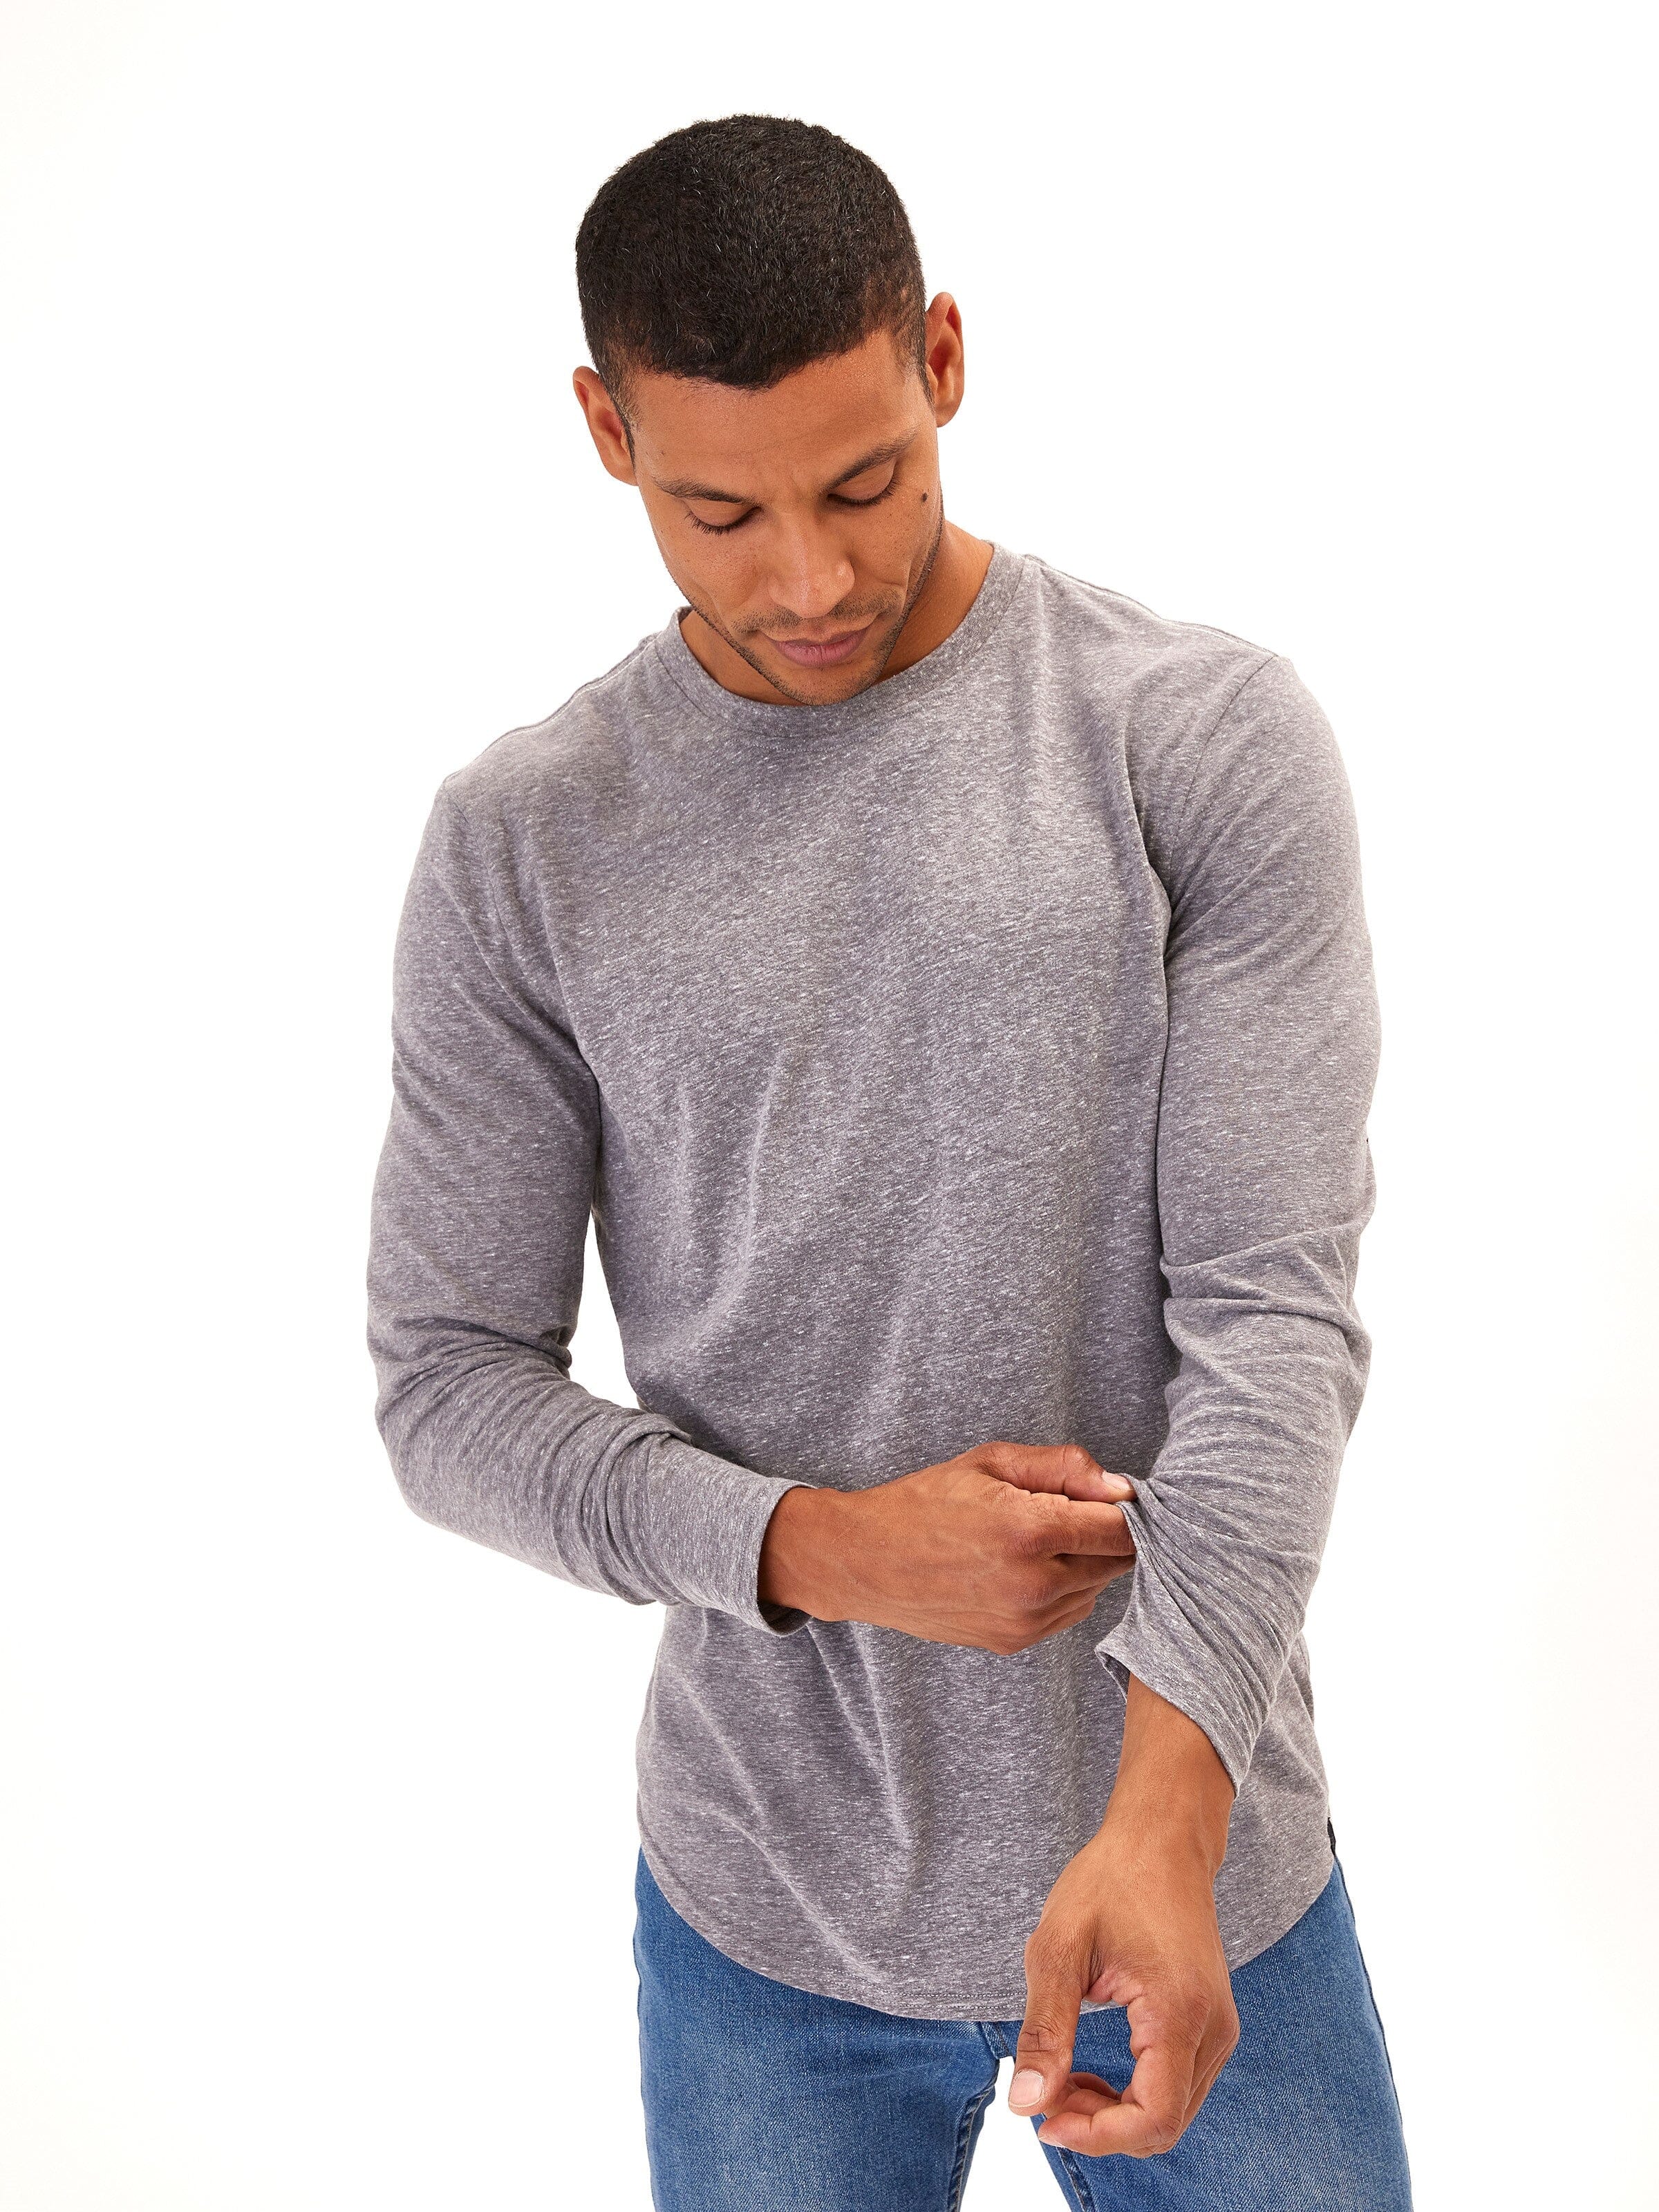 Men's Long Sleeve Tops – Threads 4 Thought